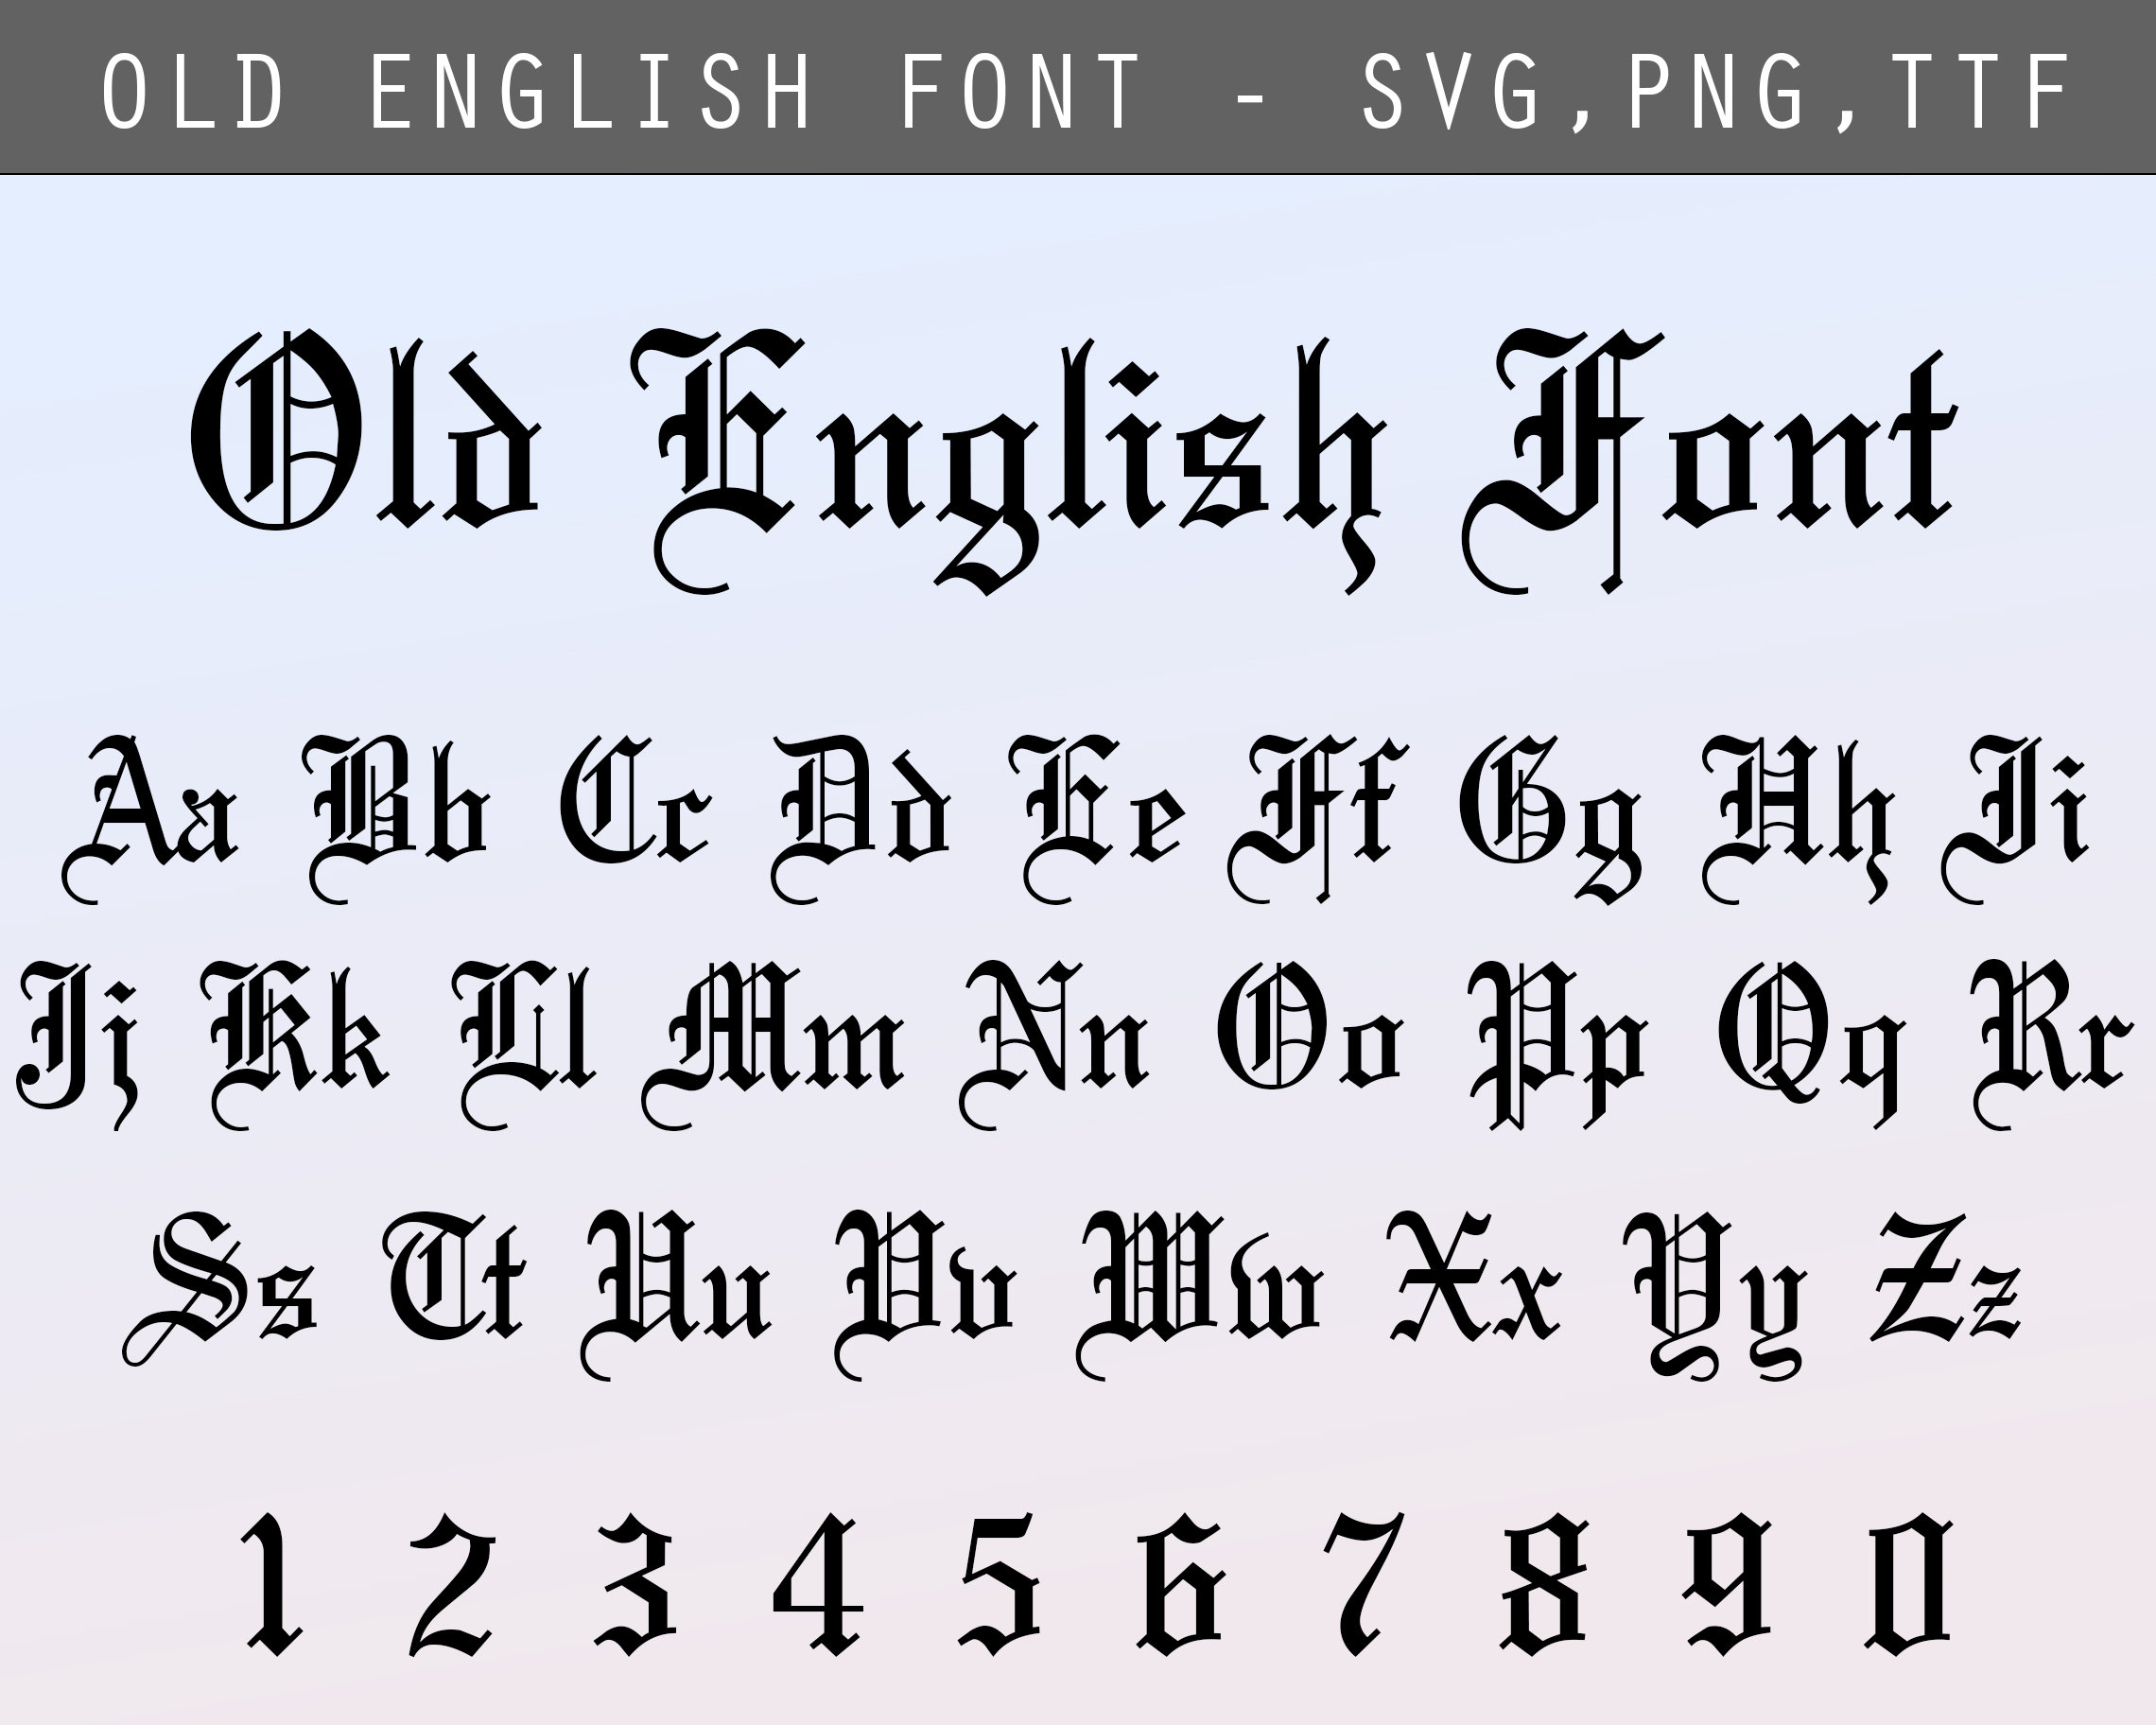 2 Old English Fonts Svg Ttf Png Letters And Numbers Font For Etsy Uk